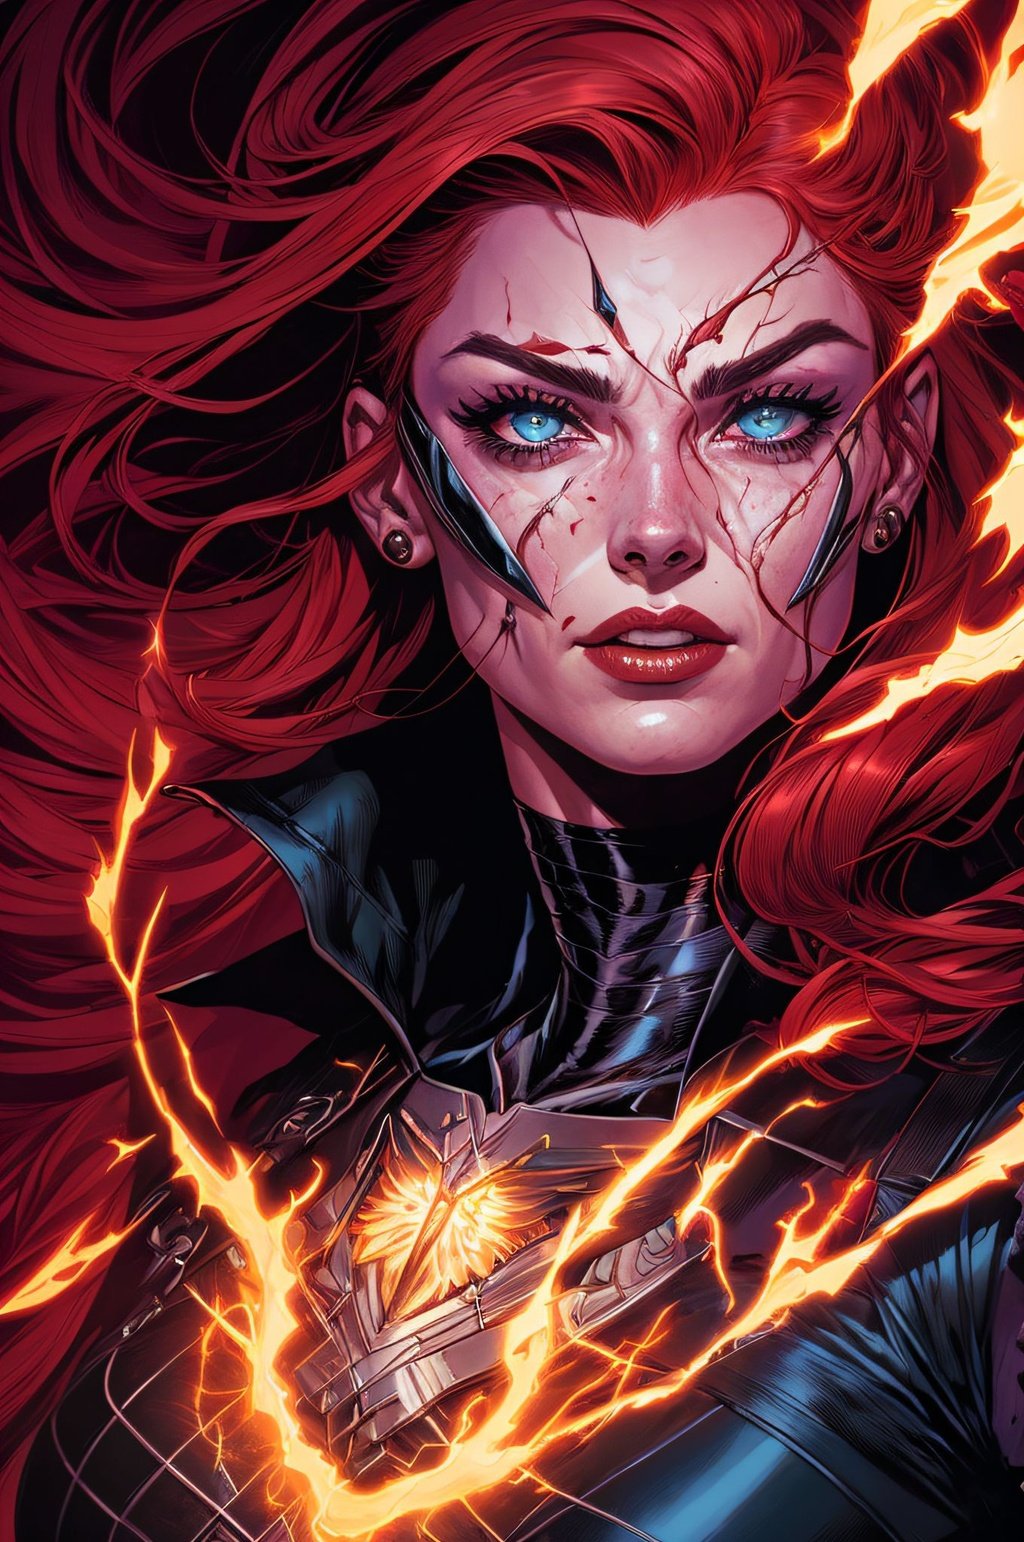 Prompt: (delightful anatomy:1.1), (gloomy illumination, insane, stunning, dramatic, completed artwork, HQ:1.1), (Apterus anatomy, Dan mumford style:1.2),  RAW photo, A fierce Audrey Hepburn as Jean Grey's Phoenix, locked in battle with Magneto in a dramatic and explosive scene, with a sense of action and danger, digital painting, sharp lighting and bold colors, art by Jim Lee and John Byrne and Olivier Coipel and David Marquez and Phil Noto, (high detailed face:1.2), 8k uhd, dslr, soft lighting, high quality, film grain, Fujifilm XT3